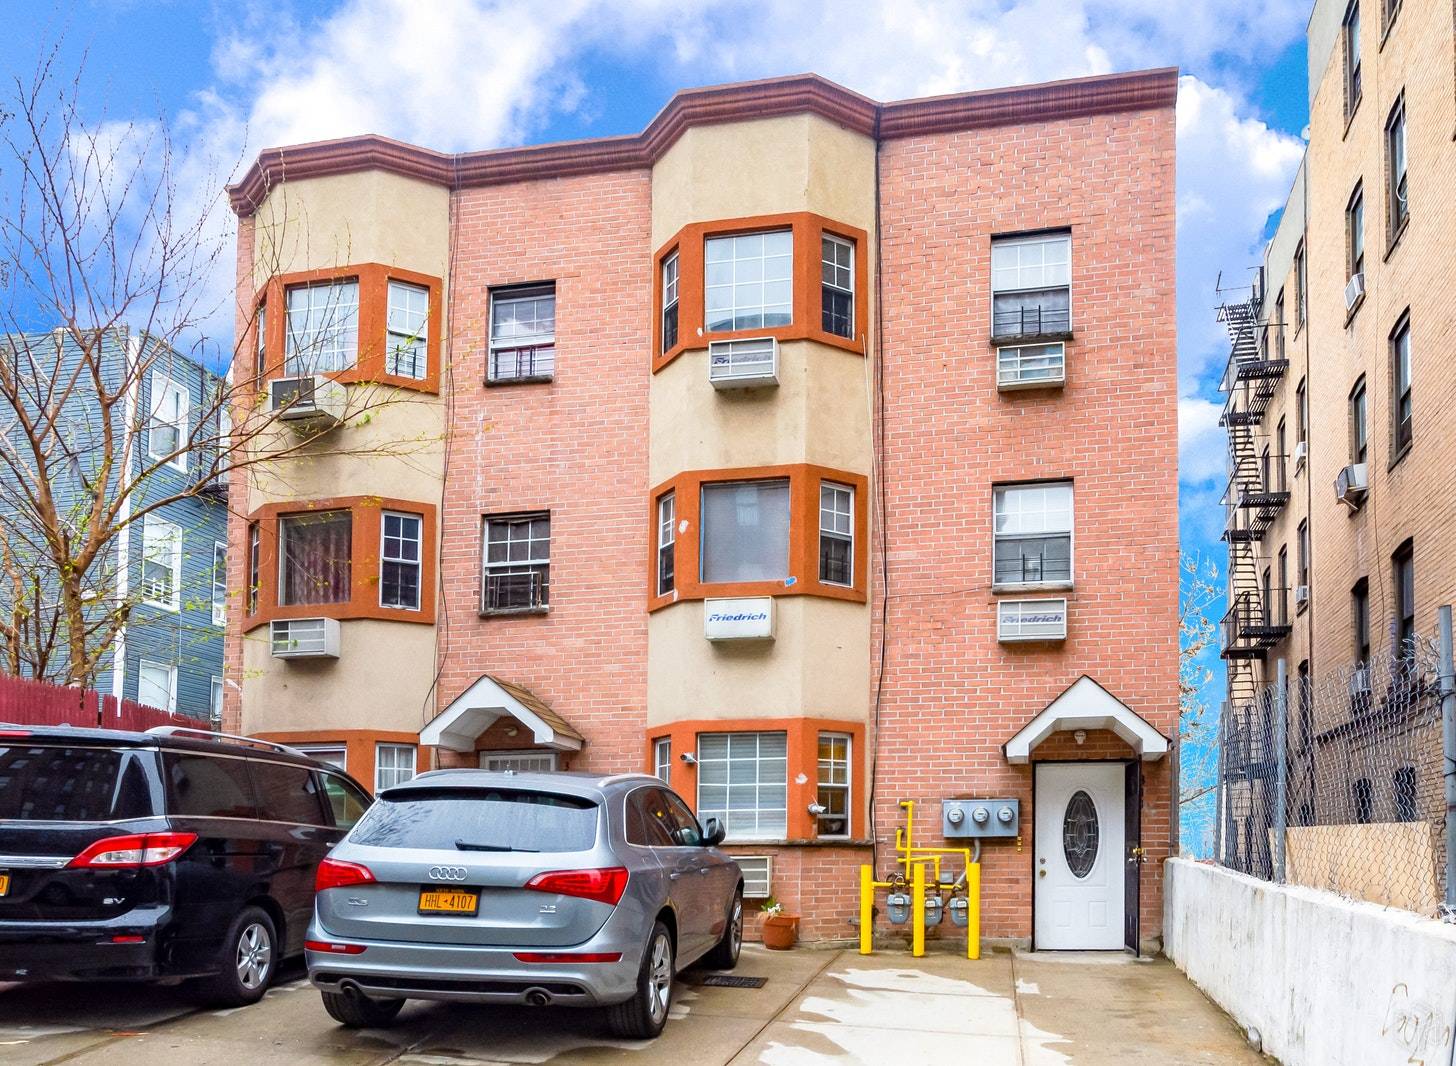 Large multi family house in the West Bronx Tremont section.